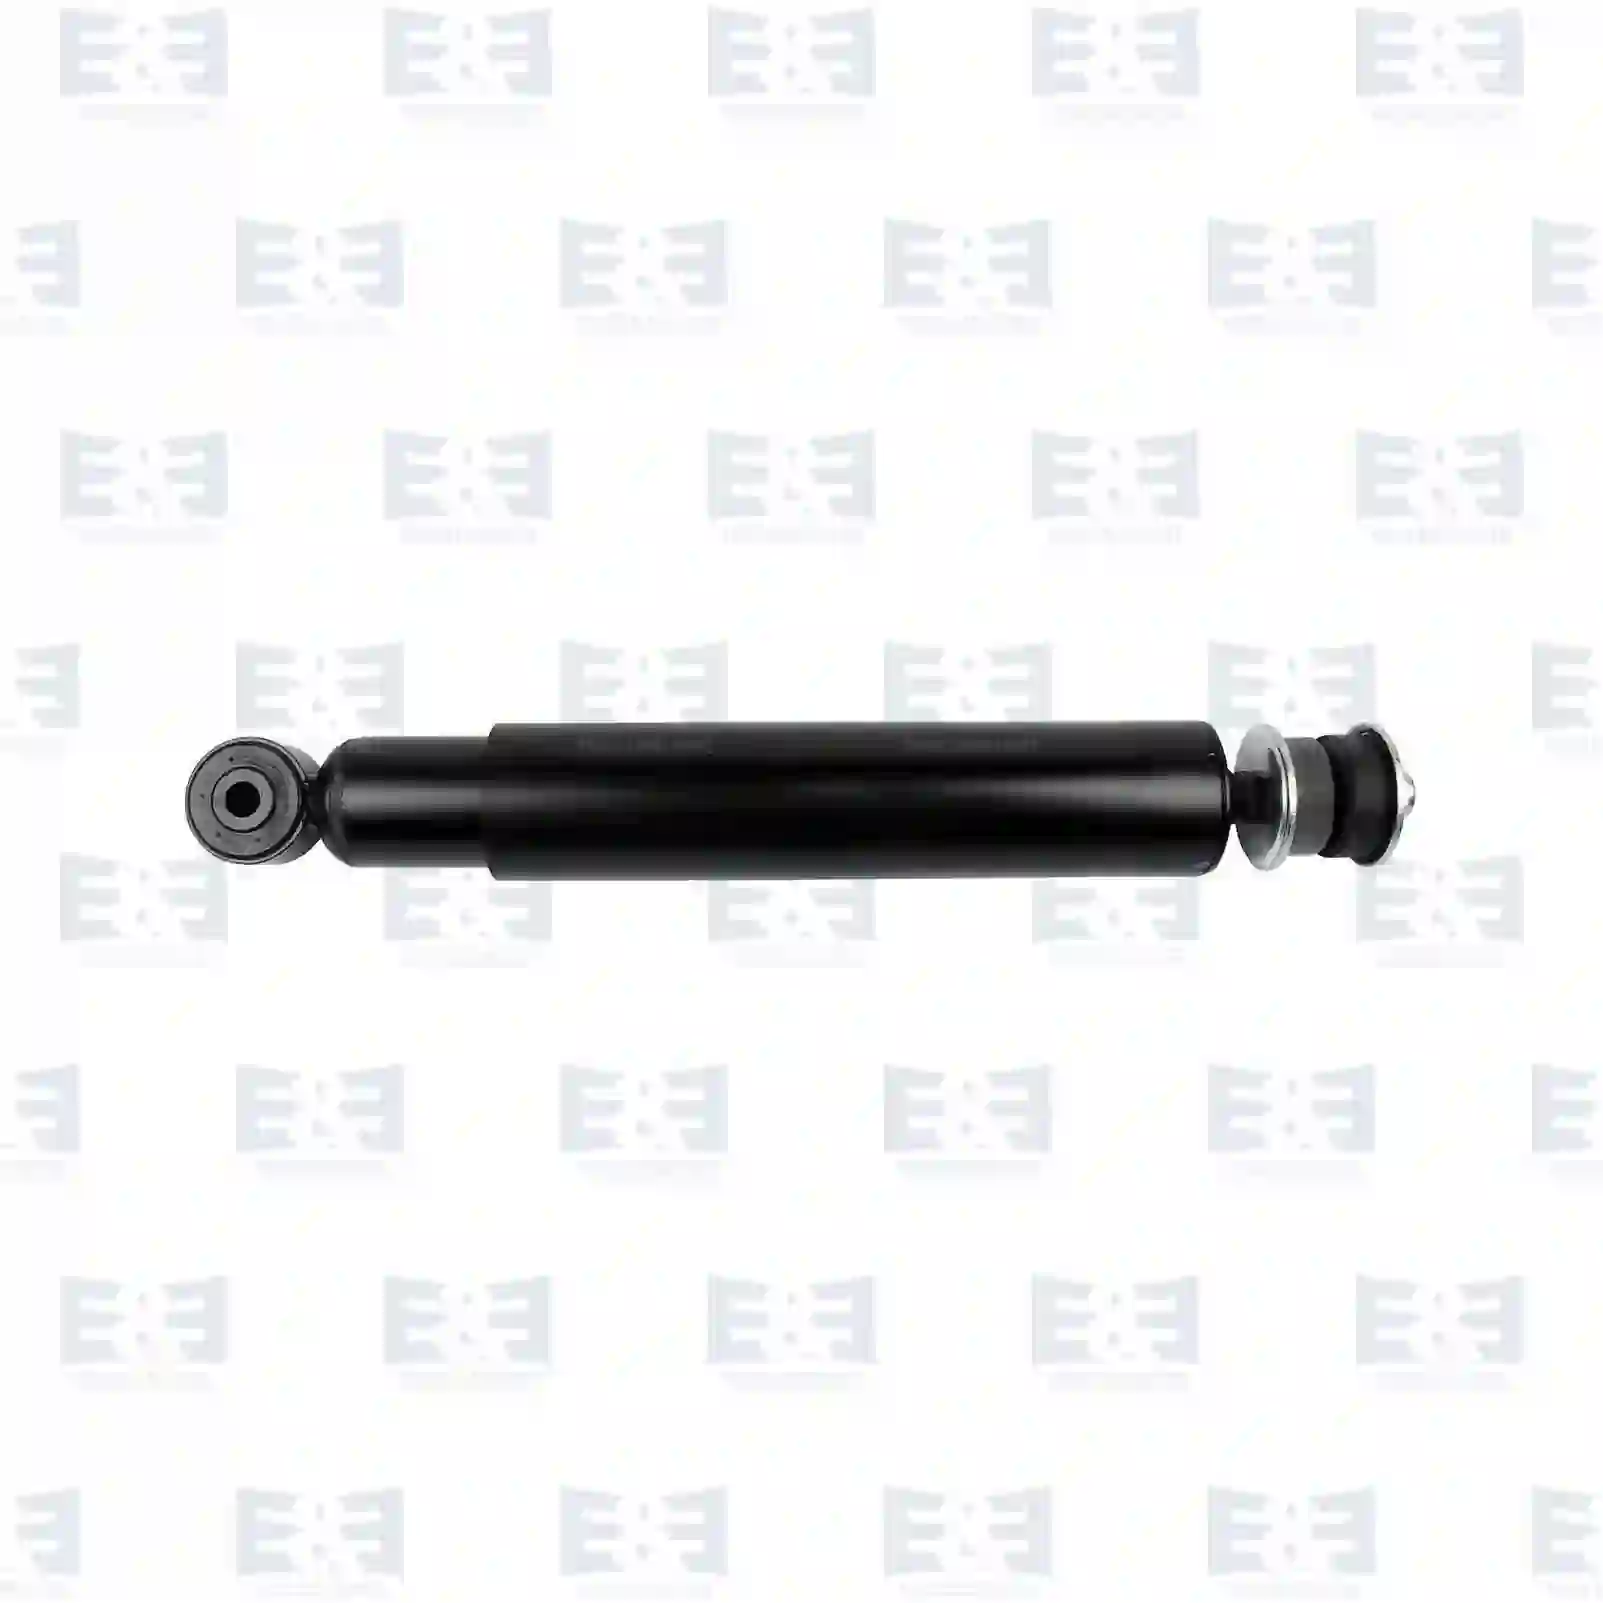 Shock Absorber Shock absorber, EE No 2E2283092 ,  oem no:1012162, 1340254, 1345105, 1381809, 20900140, 20900147, 272400, 323476, 350254, 377056, 381809 E&E Truck Spare Parts | Truck Spare Parts, Auotomotive Spare Parts